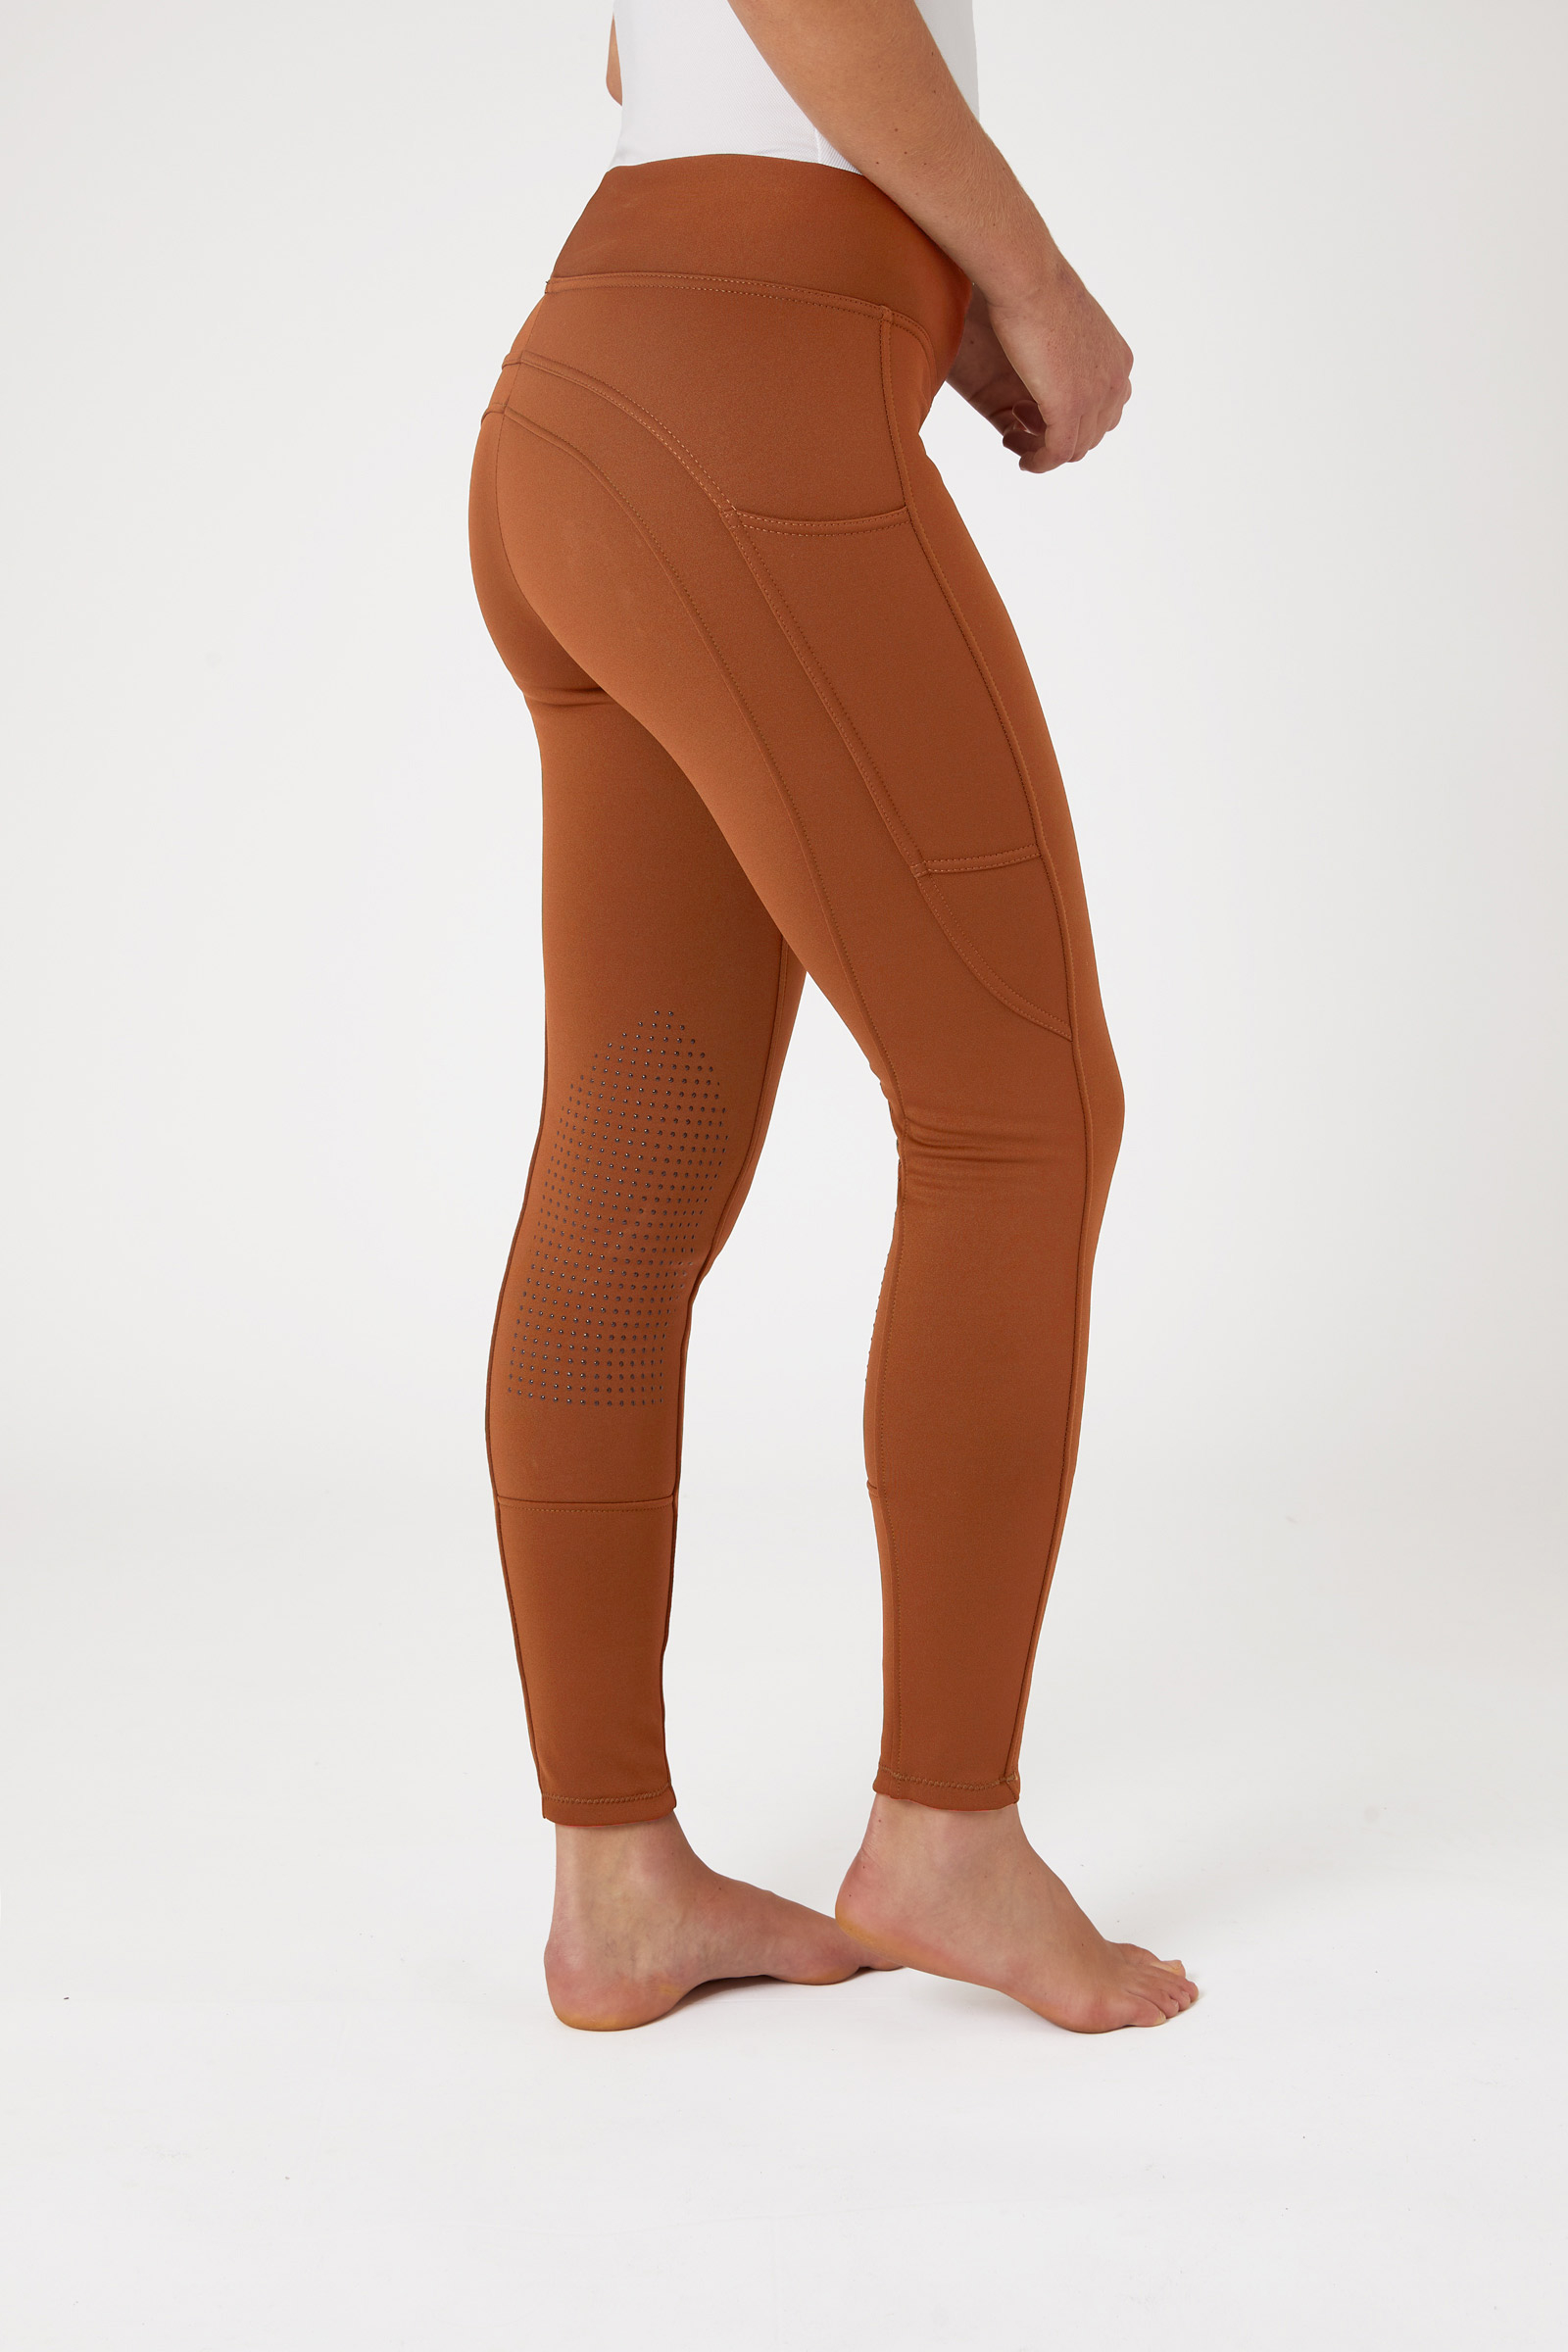 WINTER Riding Leggings / tights with phone pockets - NO GRIP